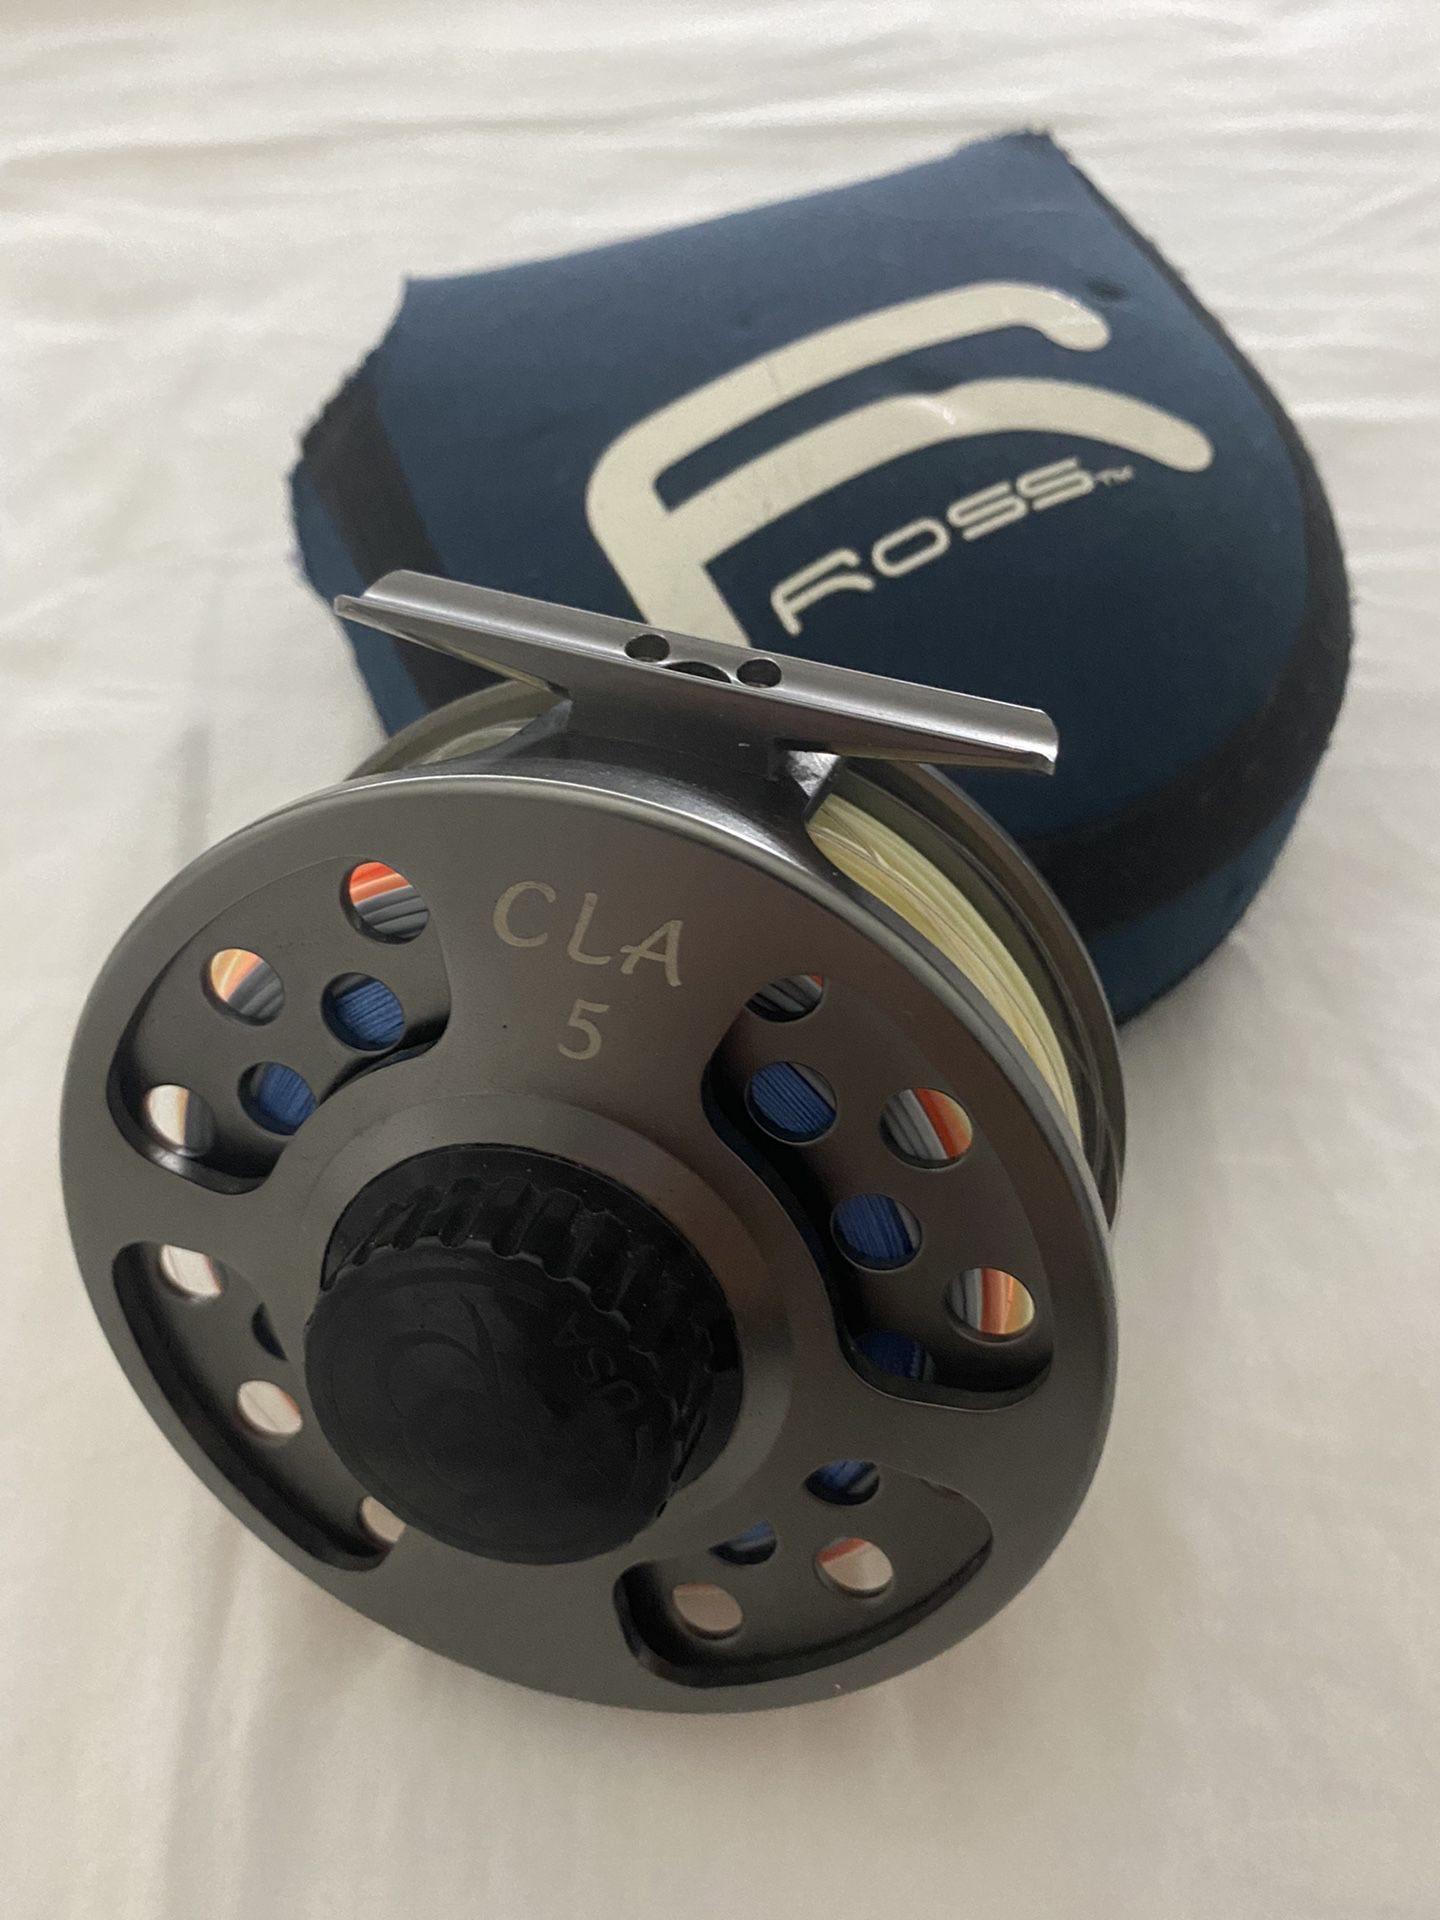 Ross CLA #5 Fly Fishing Reel for Sale in San Diego, CA - OfferUp